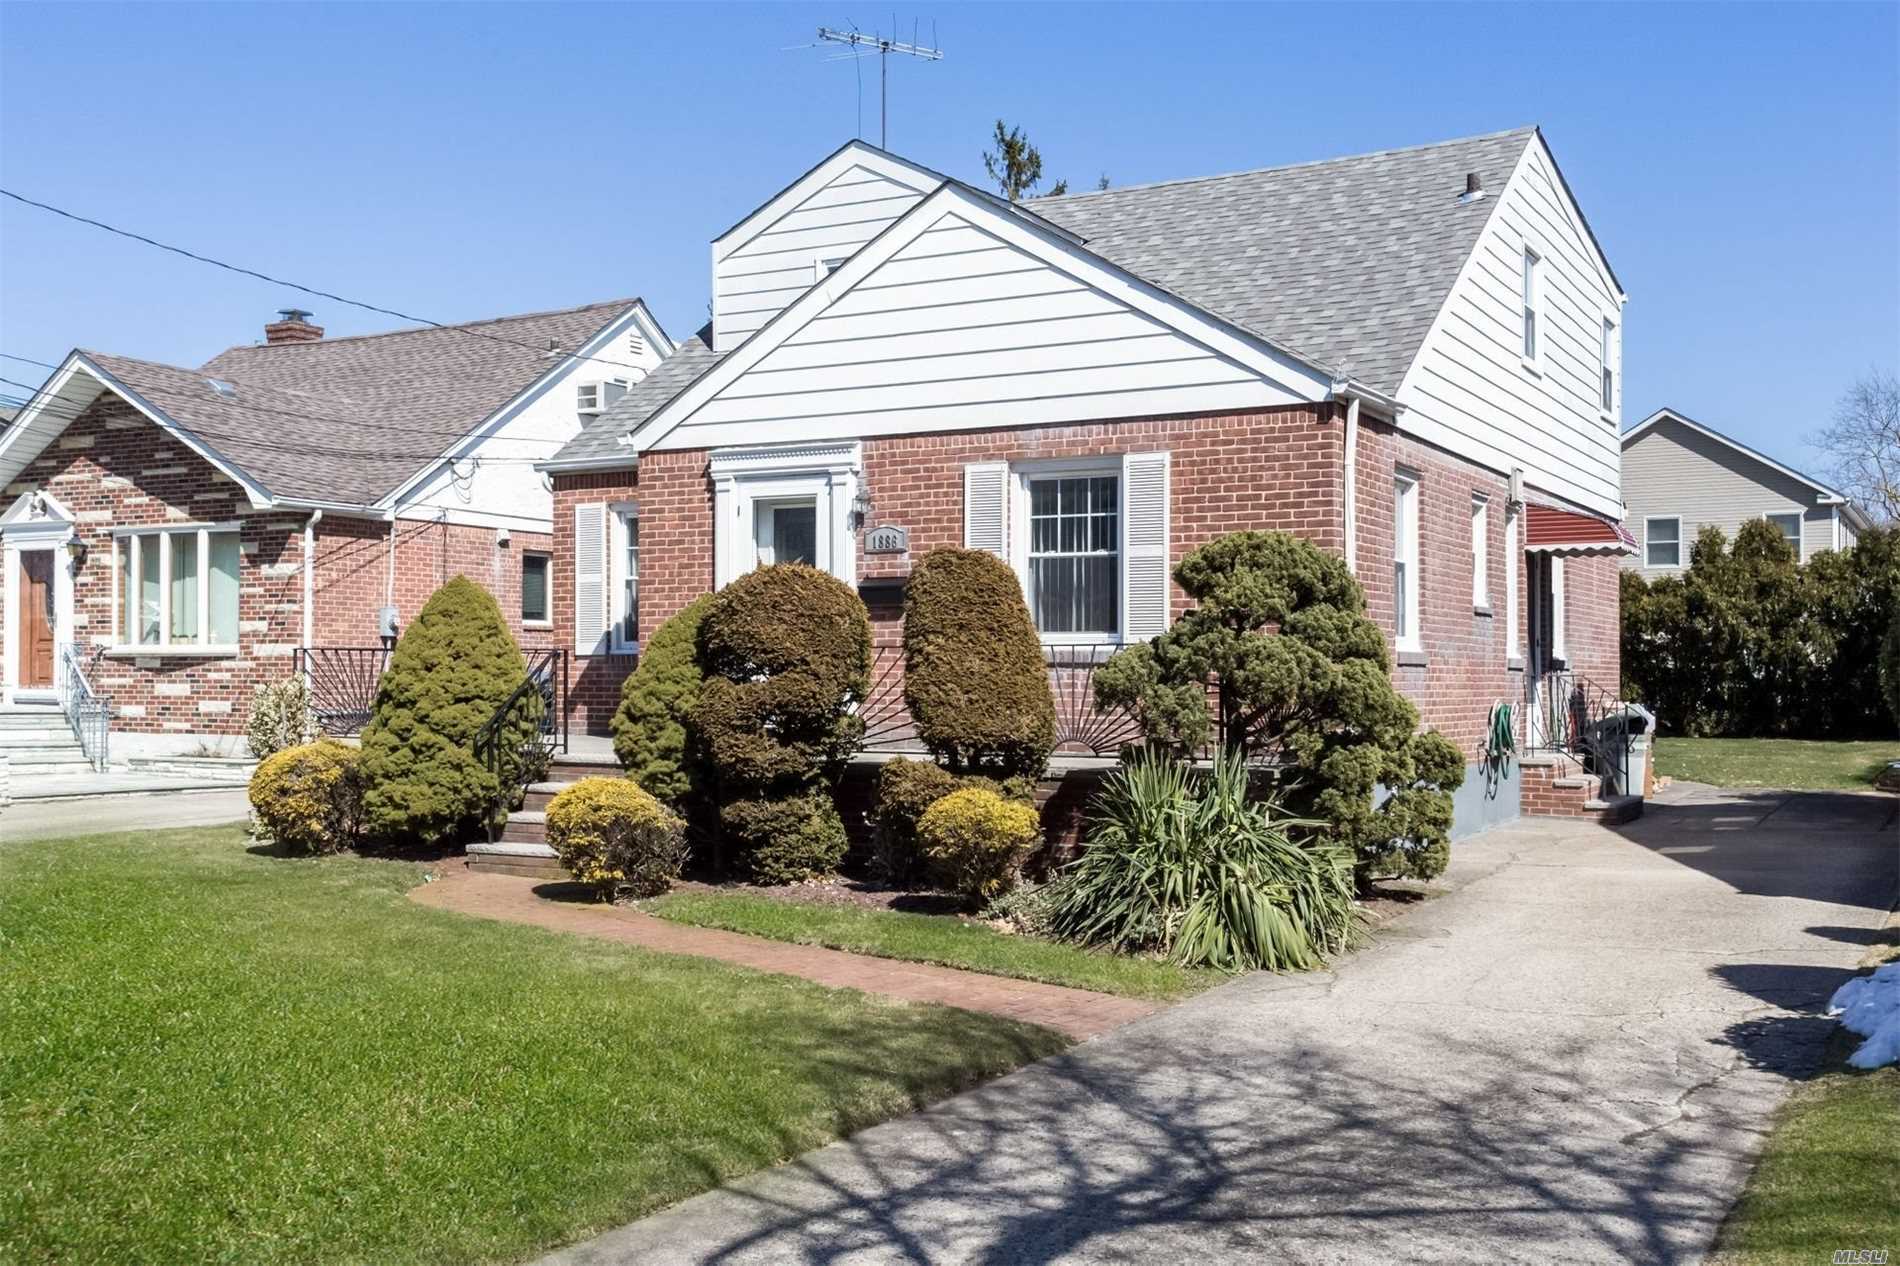 A Rare Find In New Hyde Park Featuring An Oversized Lot, Great Neck Schools, 5 Bedrooms, 2 Full Baths, Living Room, Dining Room, Eat-In Kitchen, Full Basement, Heating Unit Replaced In 2014. Roof Less Than 10 Years Young. Close To Major Expressways, Shopping Centers And Hospitals.